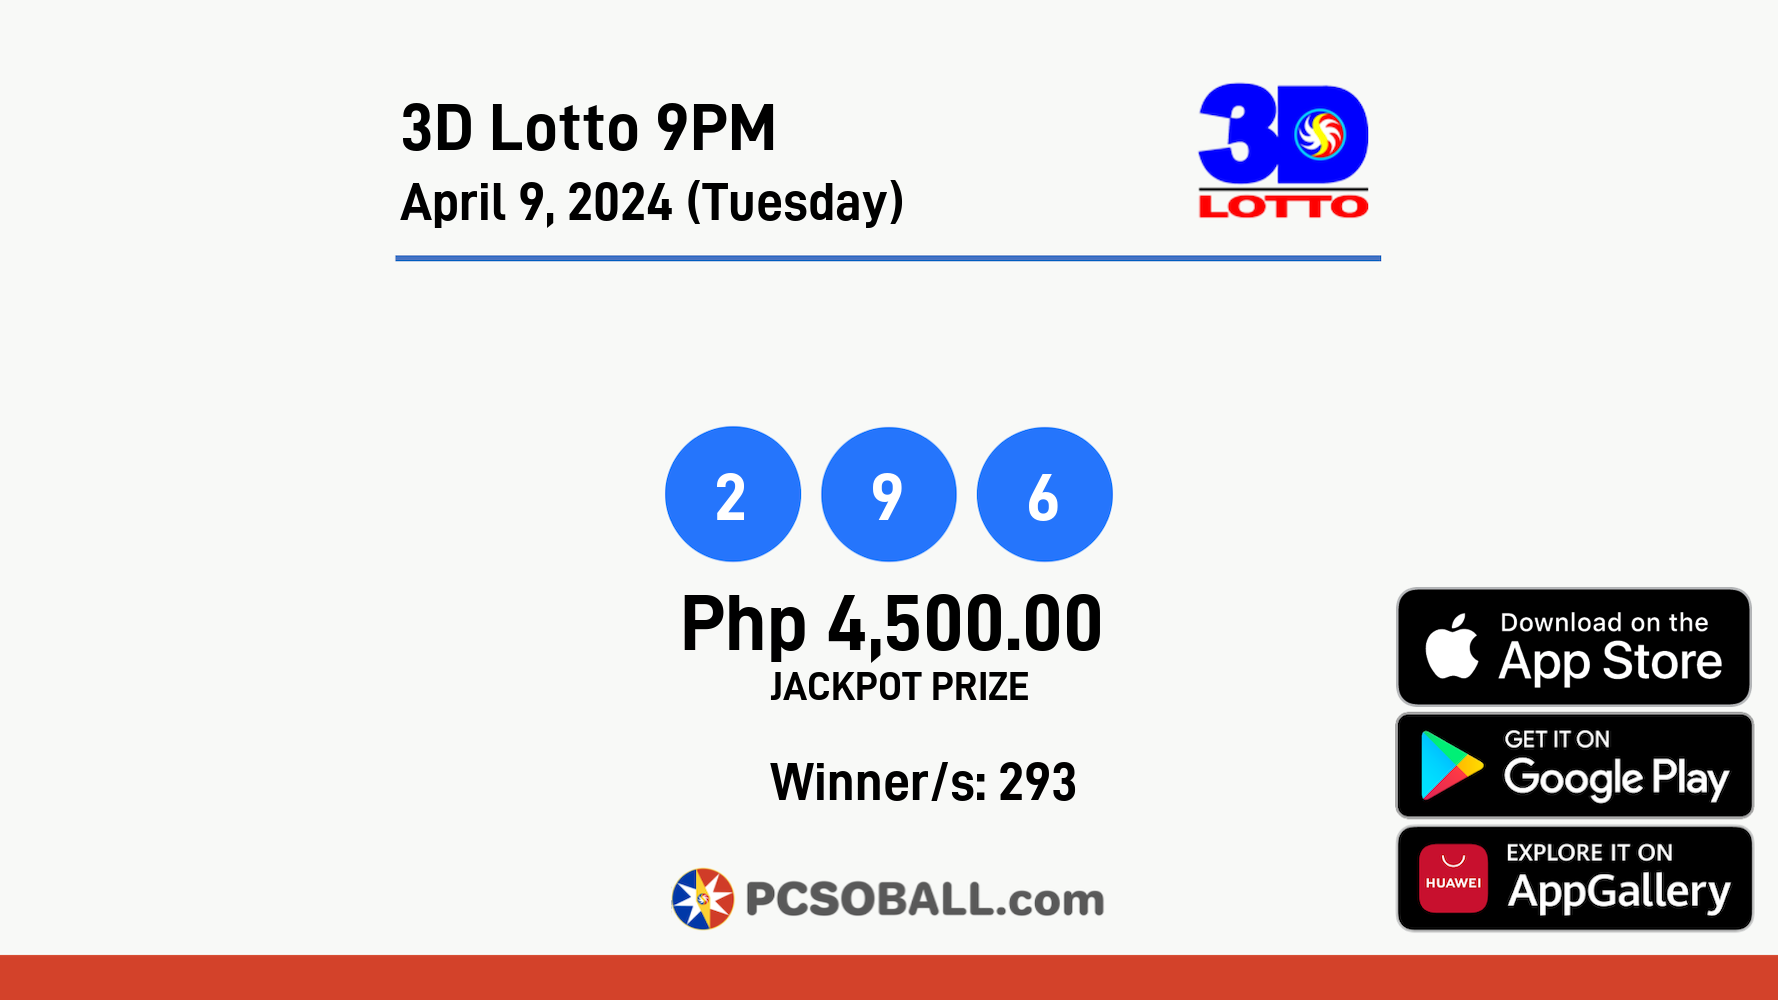 3D Lotto 9PM April 9, 2024 (Tuesday) Result